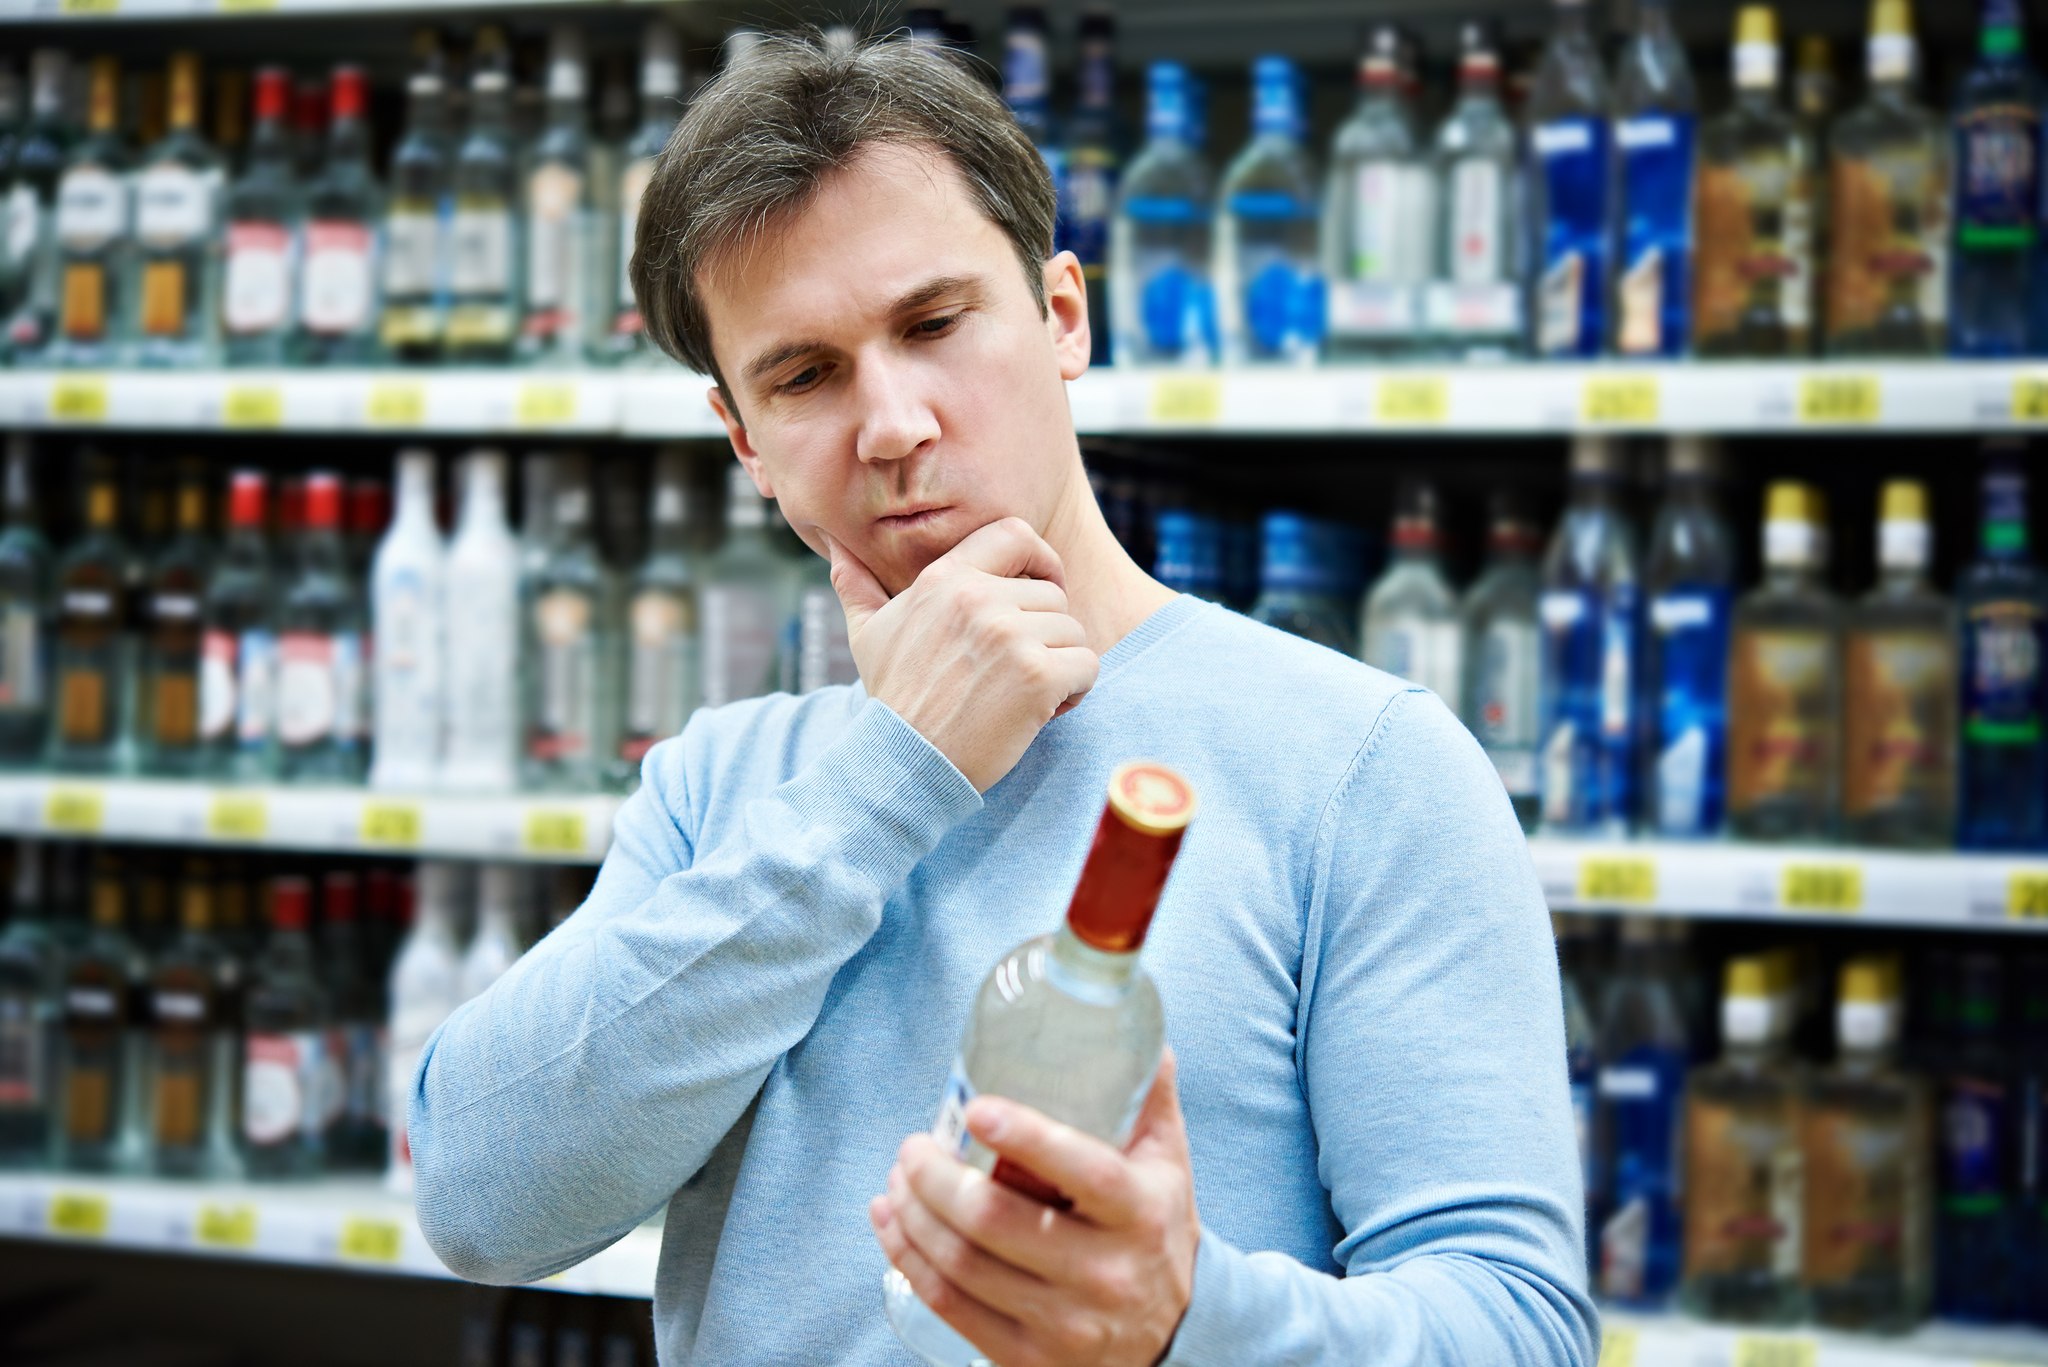 A random gent in a well-pressed shirt thinks about the state of liquor sales in Washington. Thinkstock